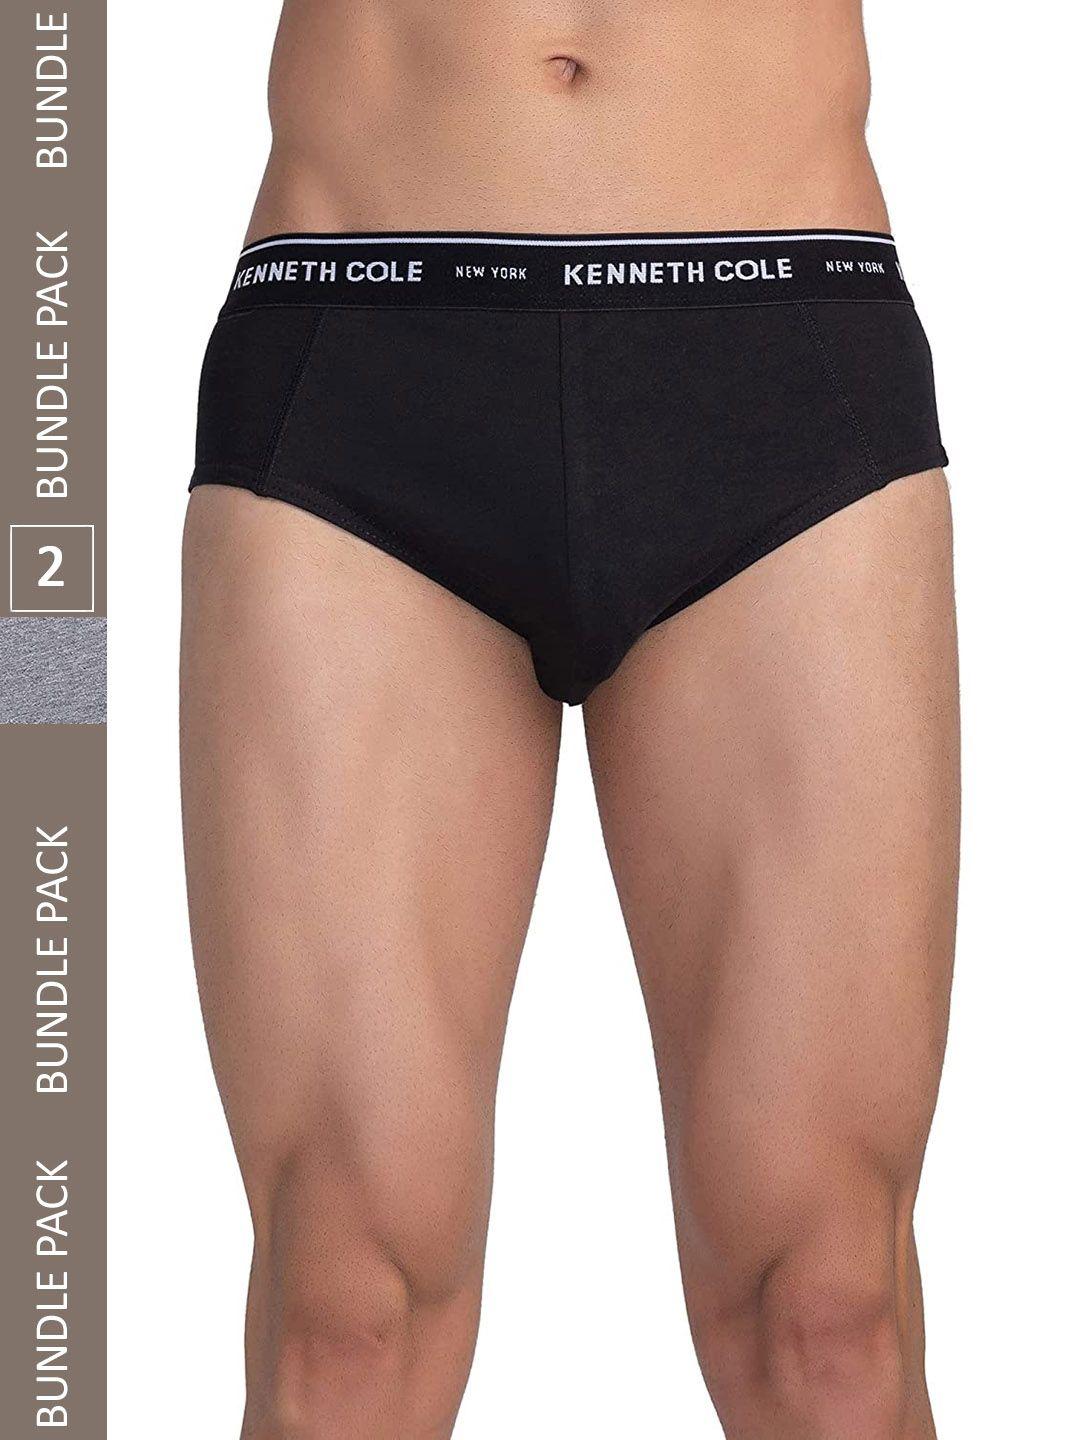 kenneth-cole-men-pack-of-2-assorted-cotton-basic-briefs